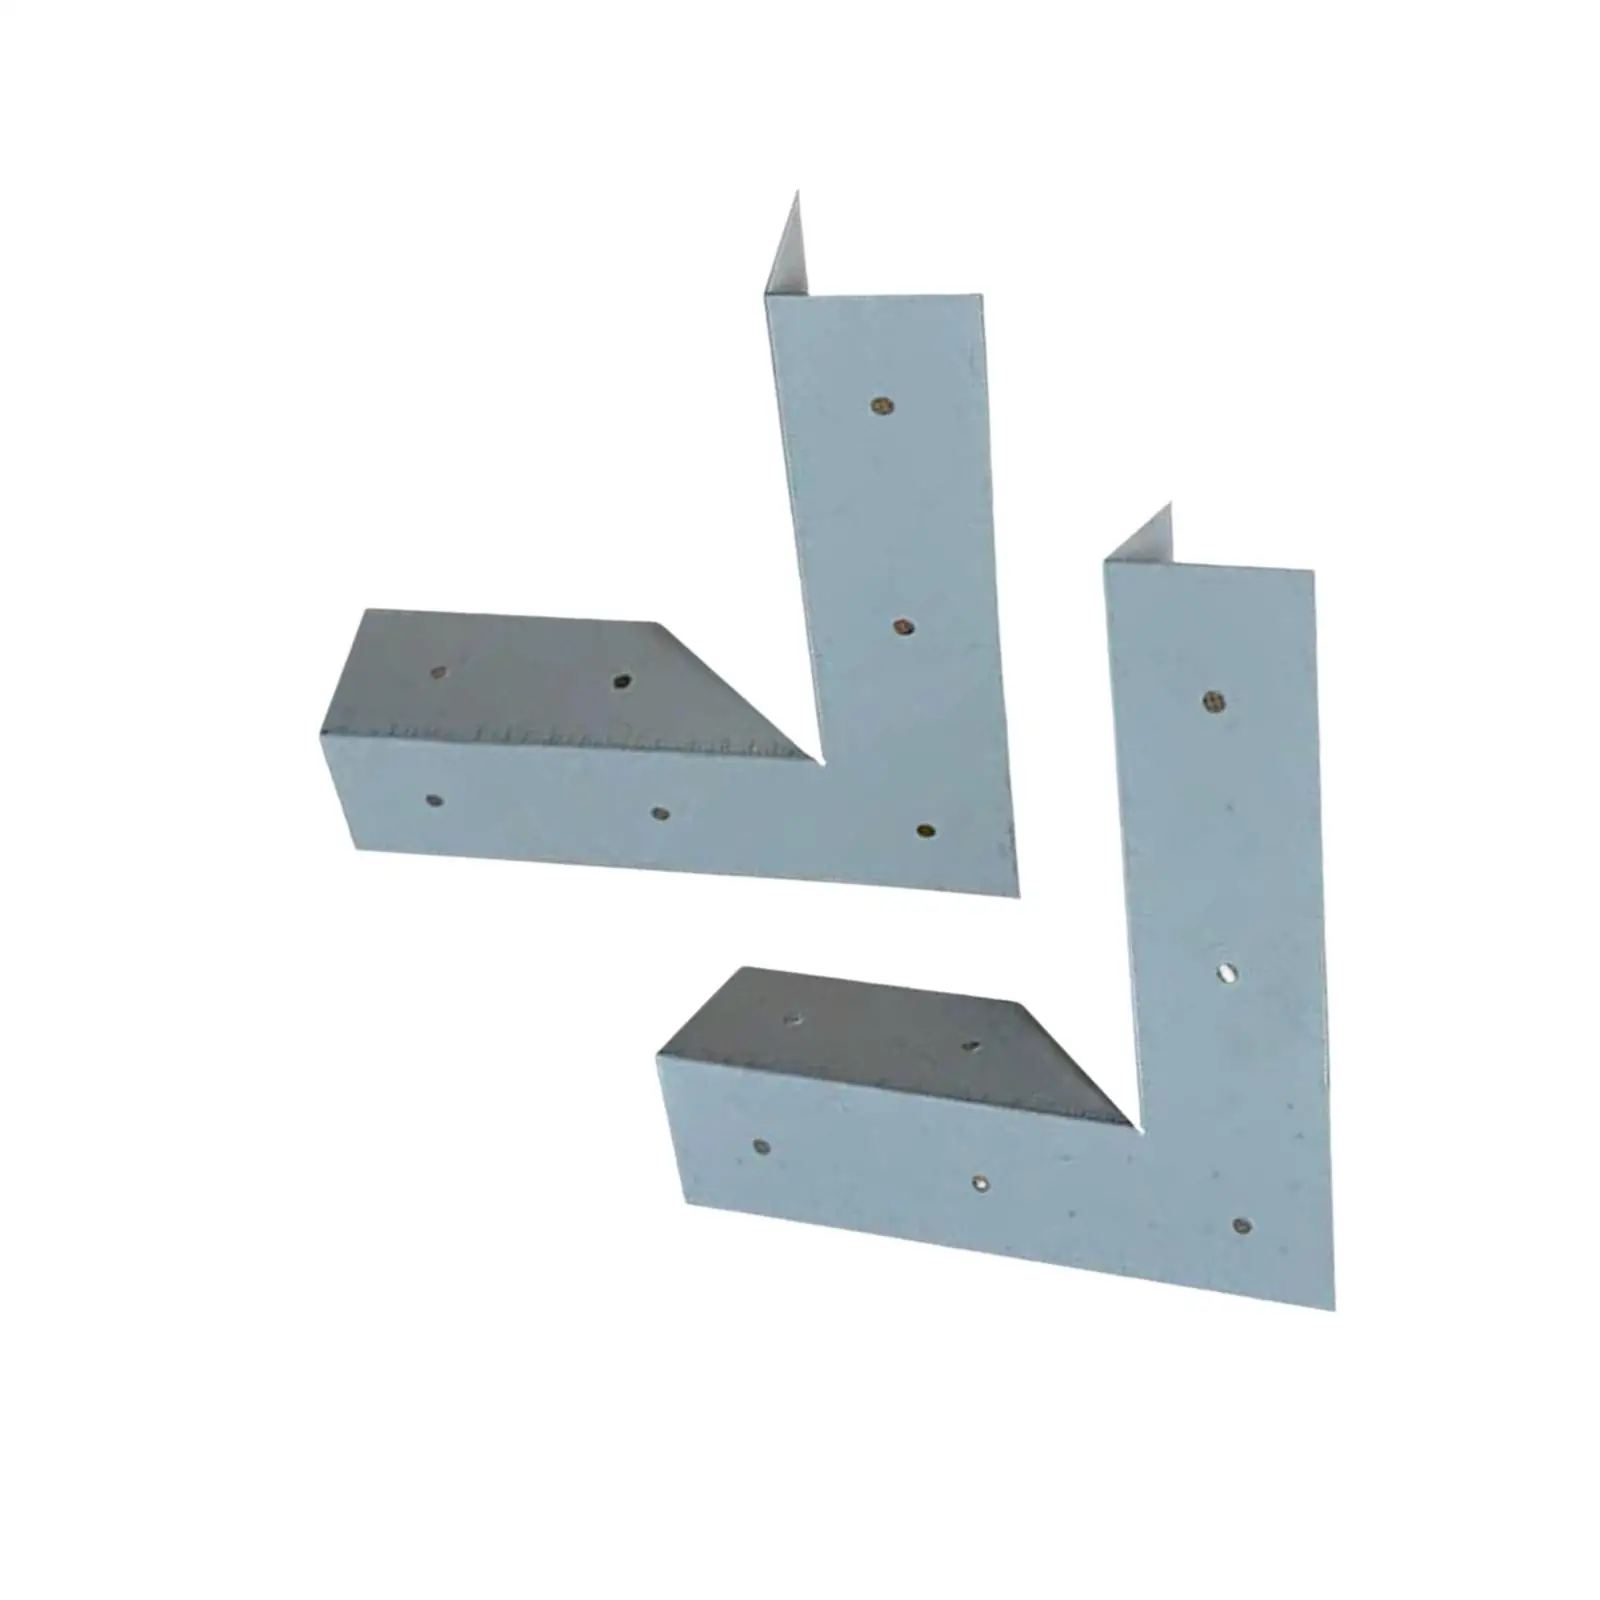 2Pcs Heavy Duty Corner Reinforcement Brackets Replaces Furniture Repair Angles Fixing hardware for Cupboard Suspended Ceilings